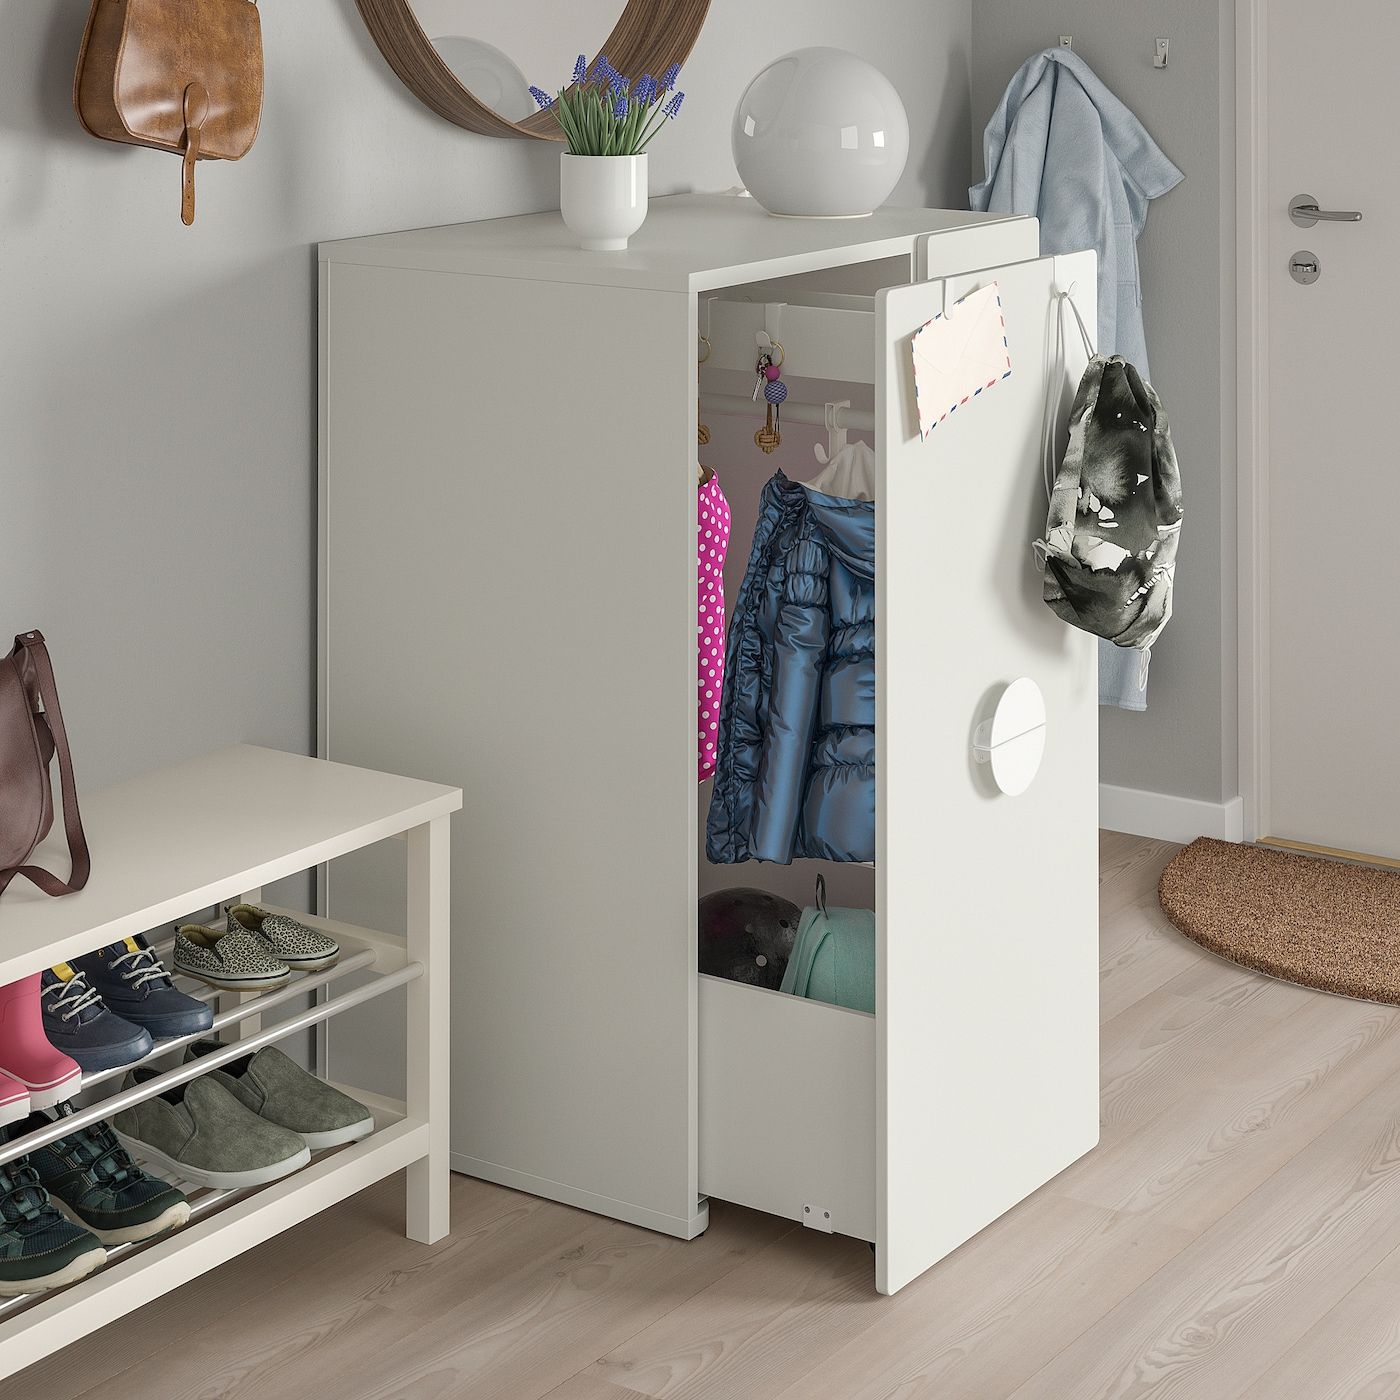 Småstad Wardrobe With Pull Out Unit, White, 31 ½x22 ½x42 ½" – Ikea With Regard To Childrens Wardrobes With Drawers And Shelves (Gallery 6 of 20)